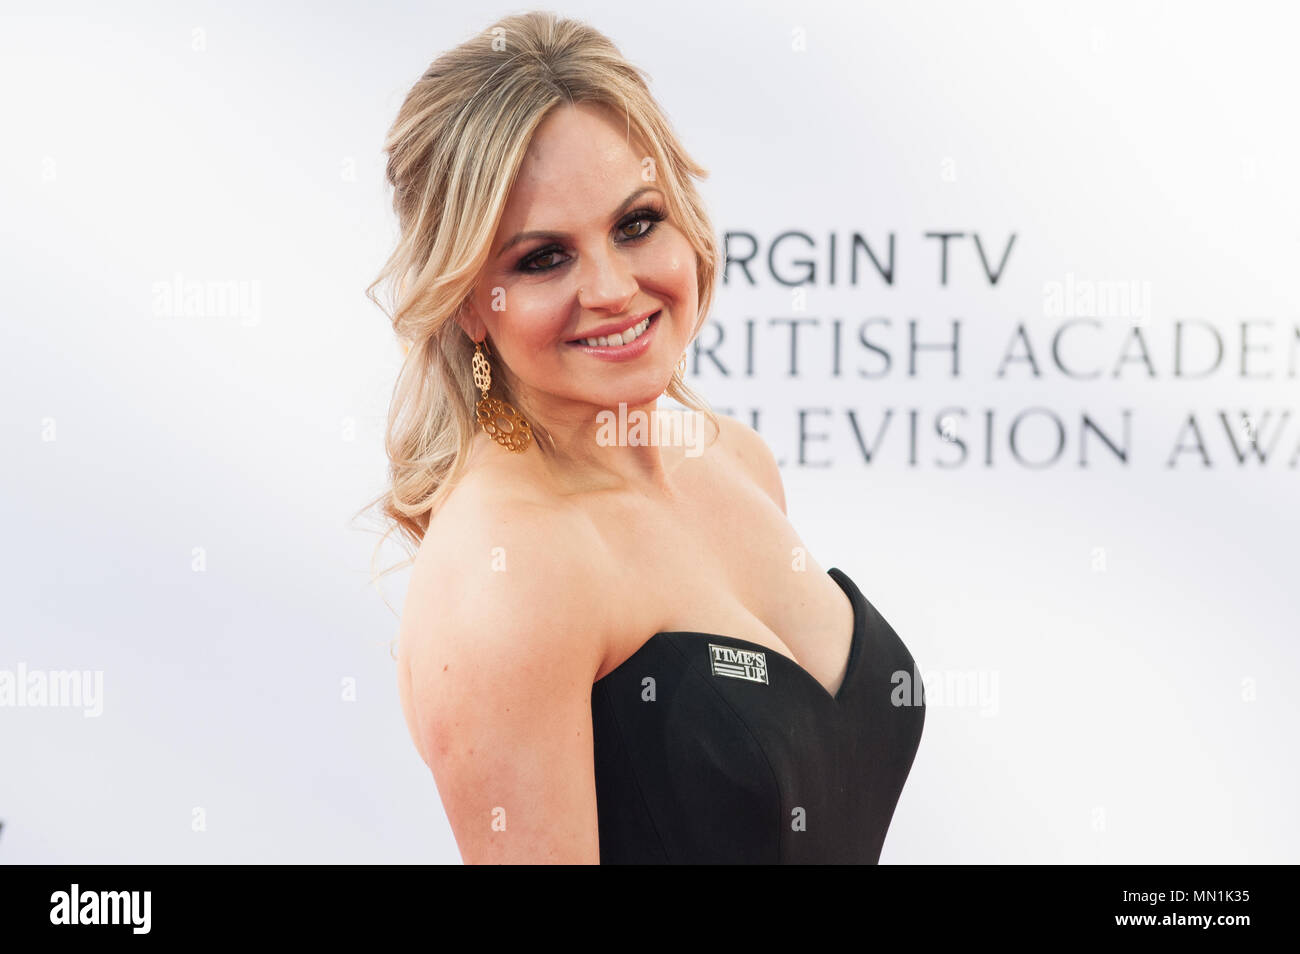 London, UK. 13th May 2018. Tina O'Brien attends the Virgin TV British Academy Television Awards ceremony at the Royal Festival Hall. Credit: Wiktor Szymanowicz/Alamy Live News. Stock Photo